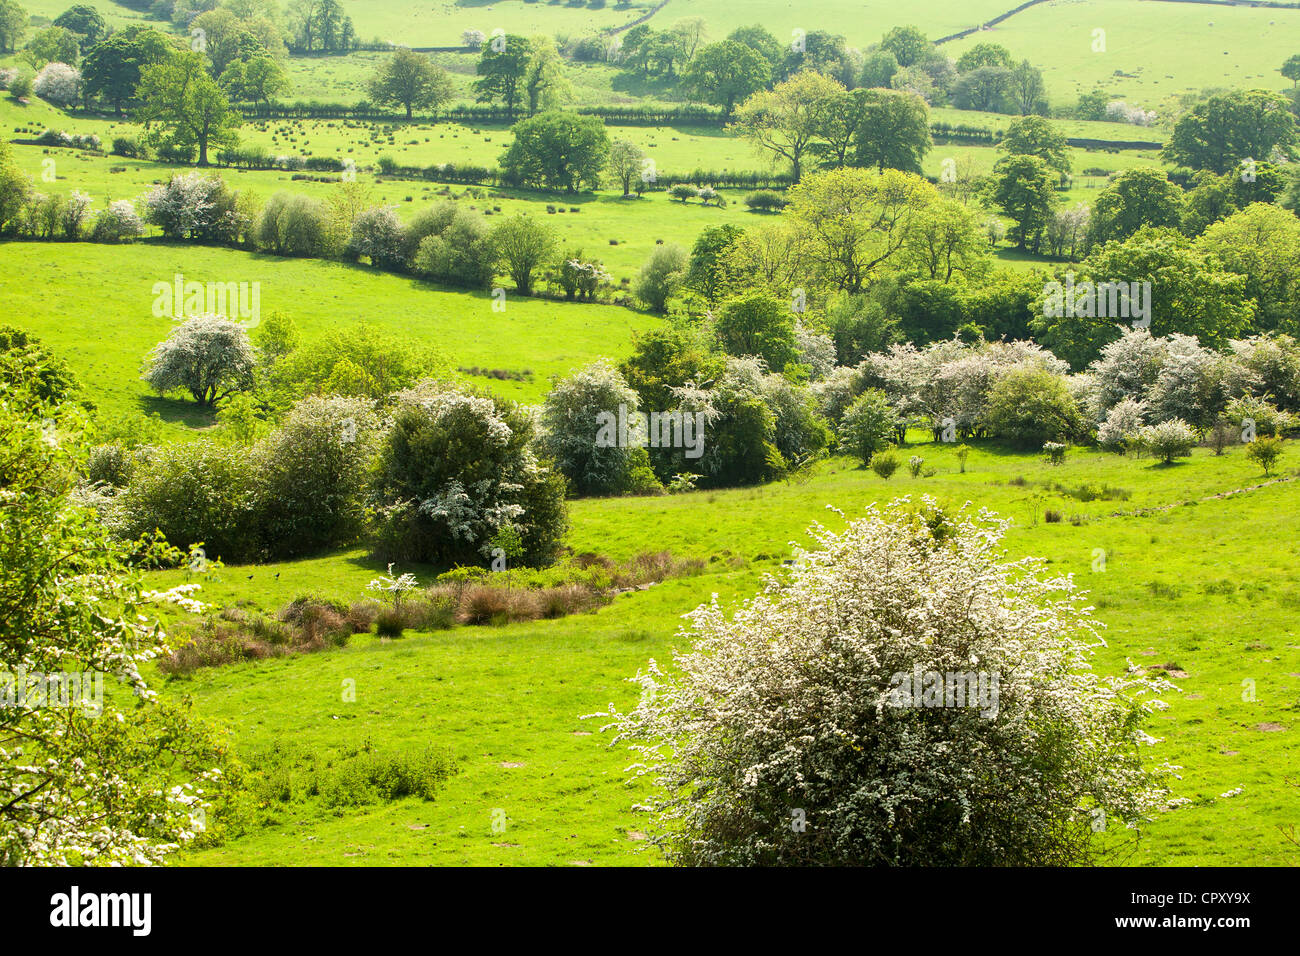 The Cheshire countryside on the outskirts of Macclesfield, Cheshire, UK. Stock Photo